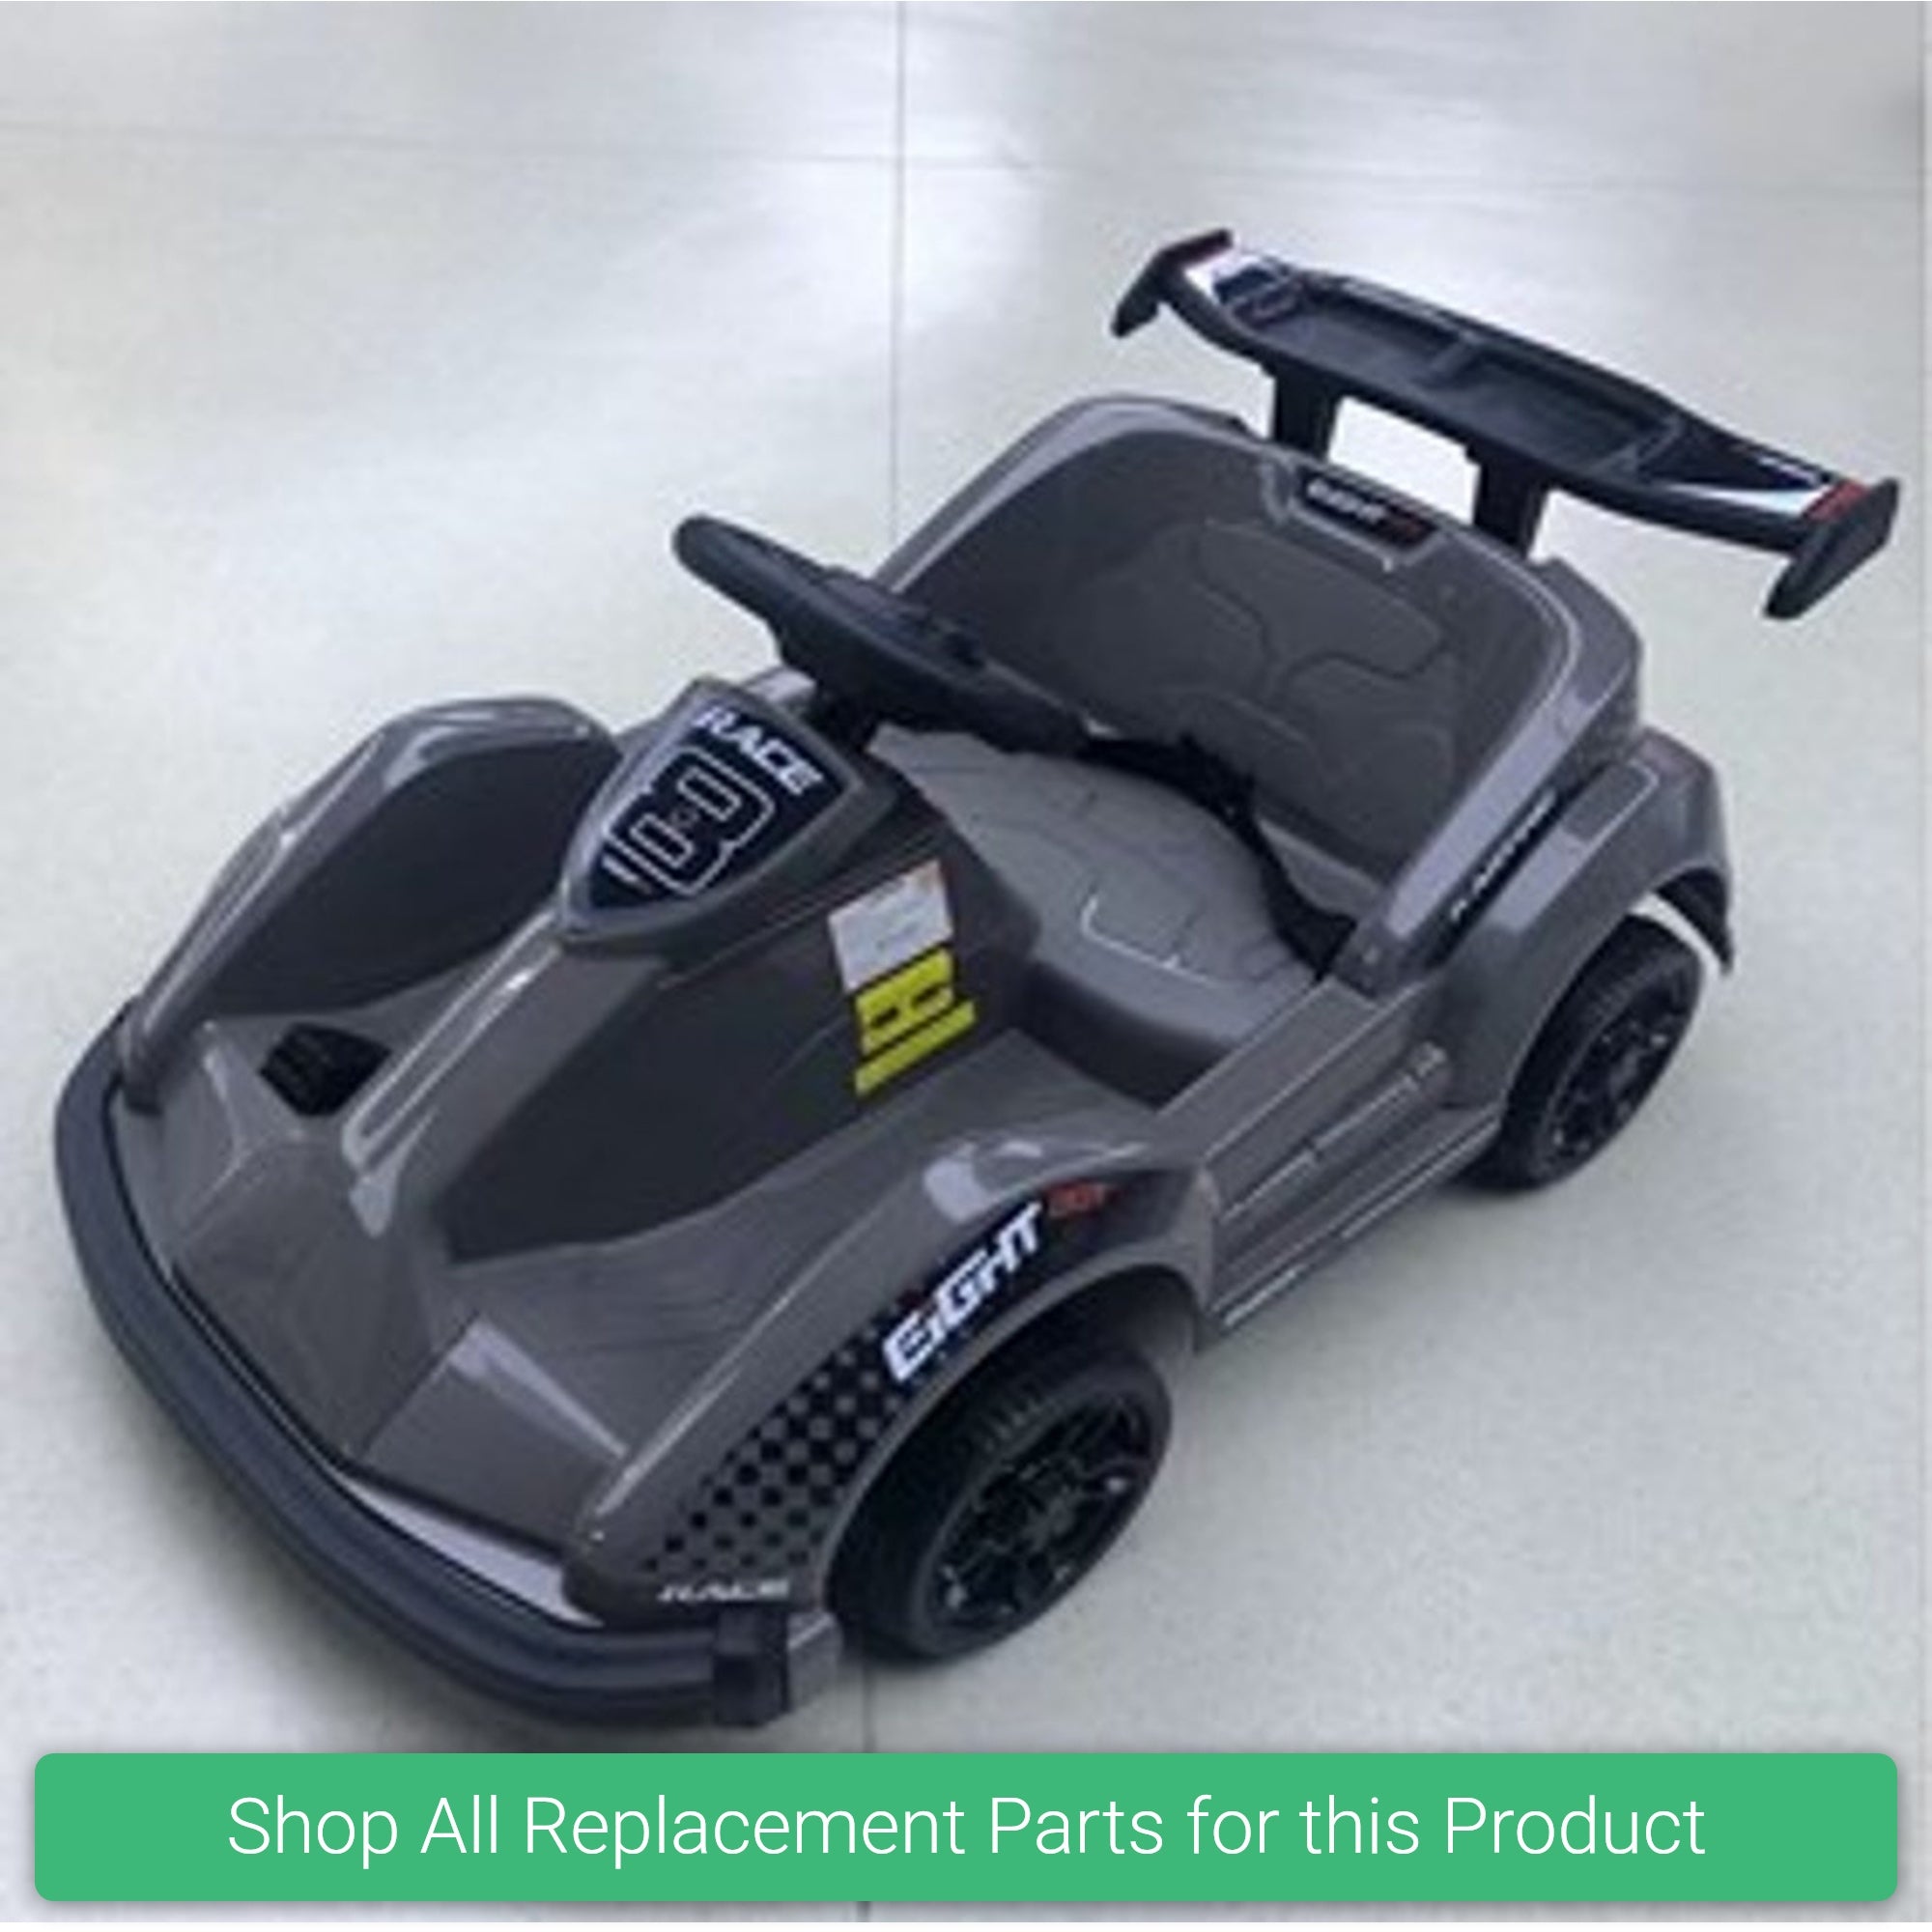 Replacement Parts and Spares for Kids Kids Small 6V Drift Kart - DRIFT-6-VARI - JE1199